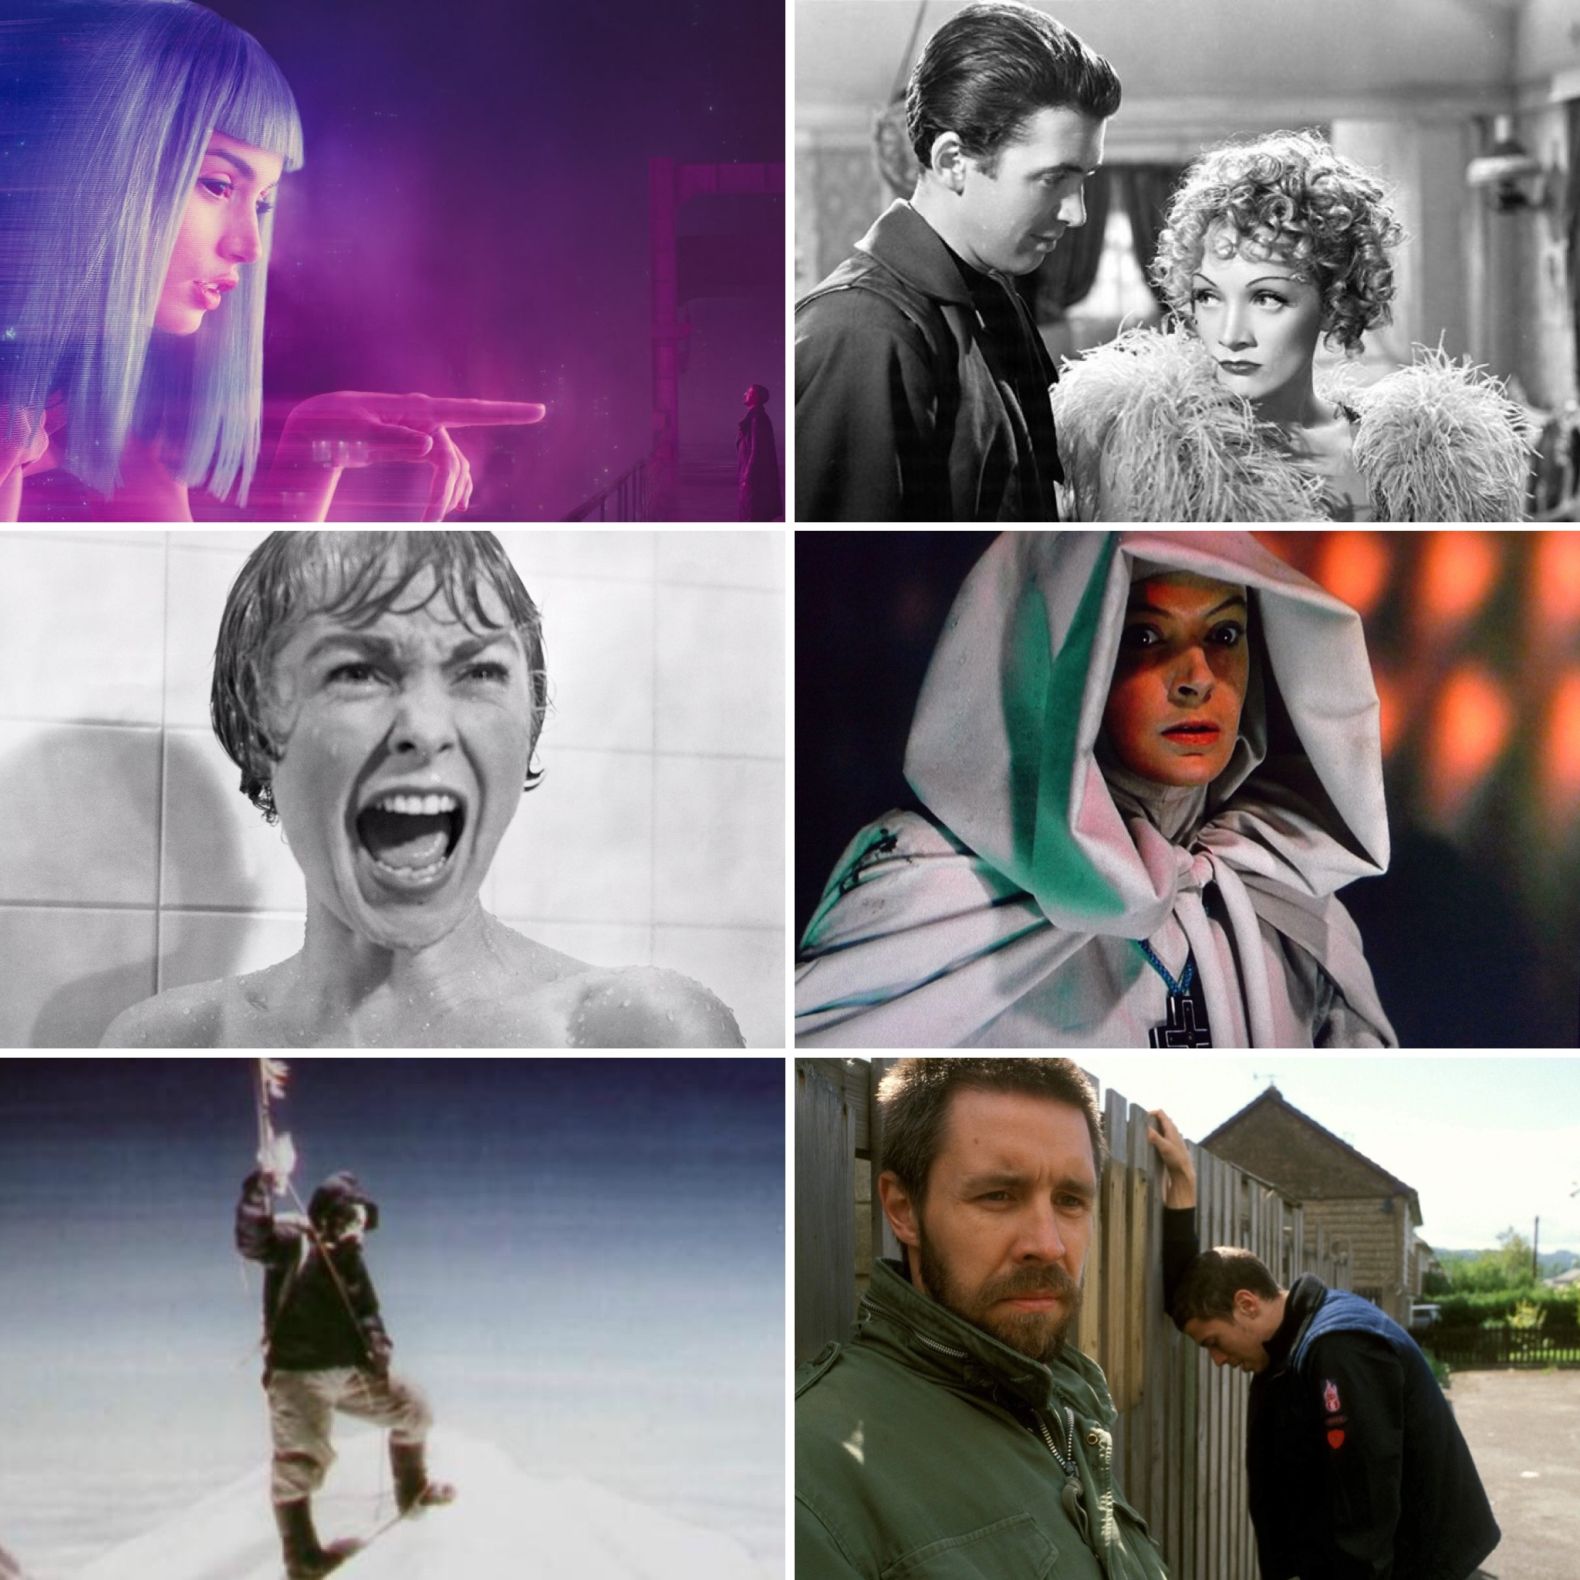 Duke Box #43: Our Guide to the Best Films on TV